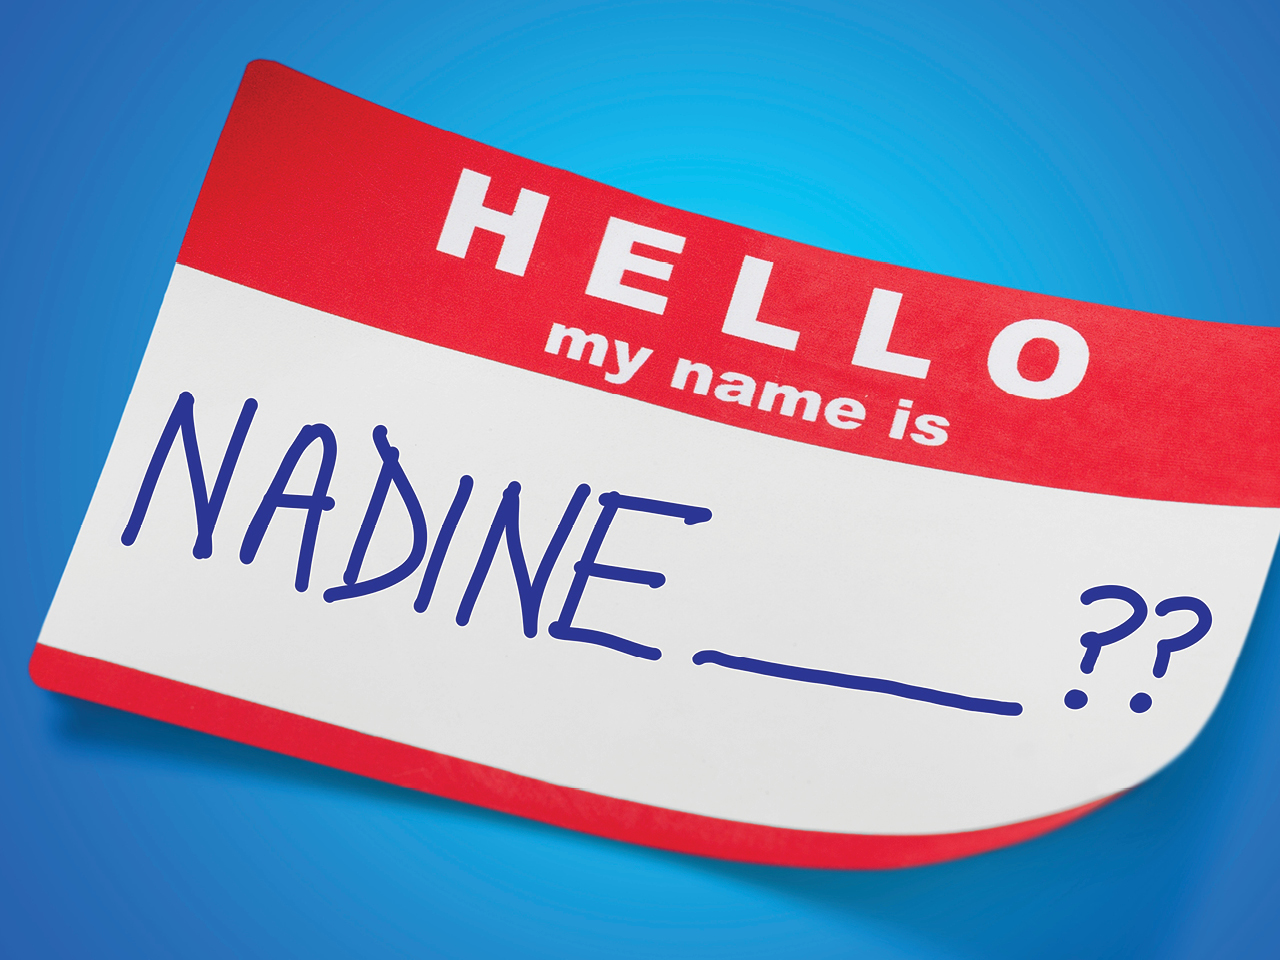 A classic "Hello, my name is" name tag in red and white with Nadine and question marks written on it in marker on a blue background